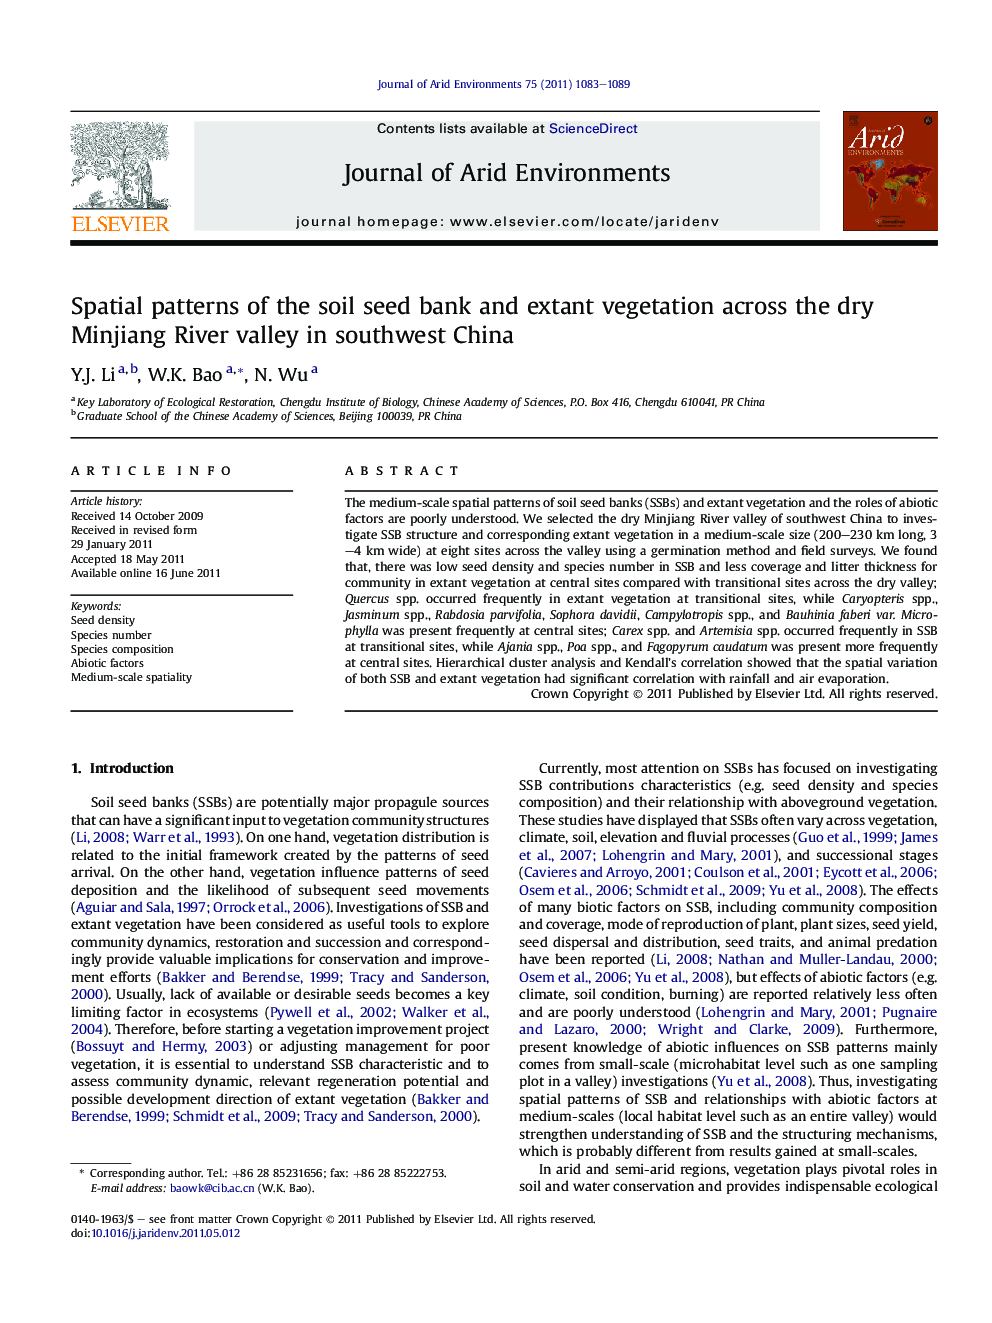 Spatial patterns of the soil seed bank and extant vegetation across the dry Minjiang River valley in southwest China